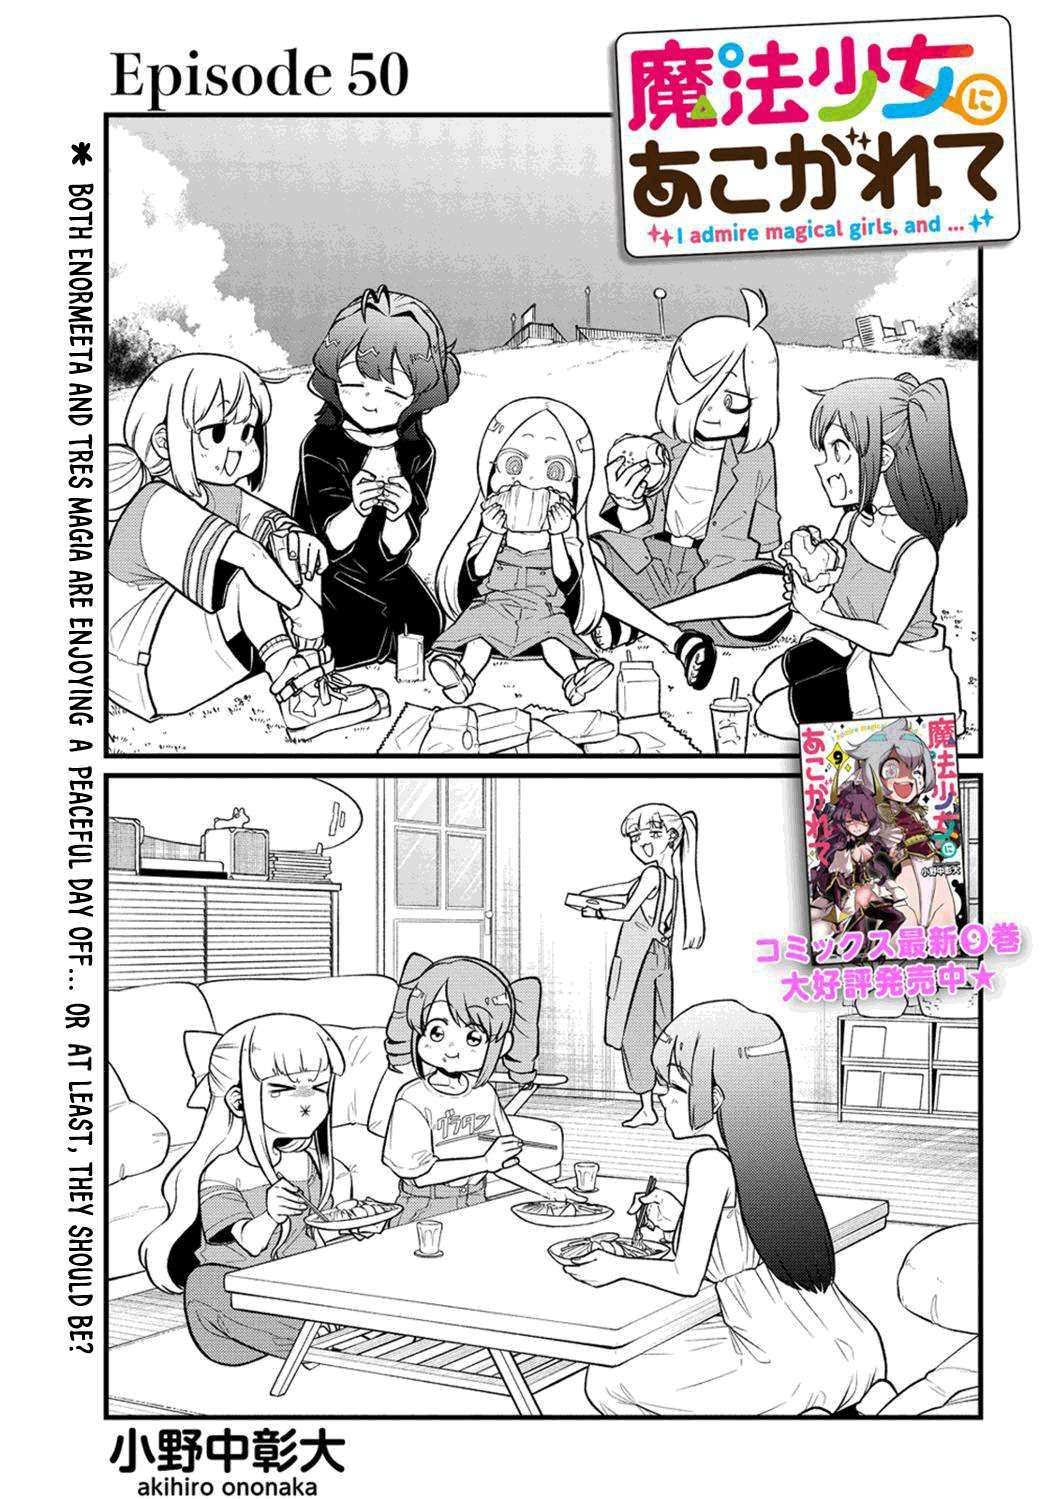 Gushing over Magical Girls - chapter 50 - #3